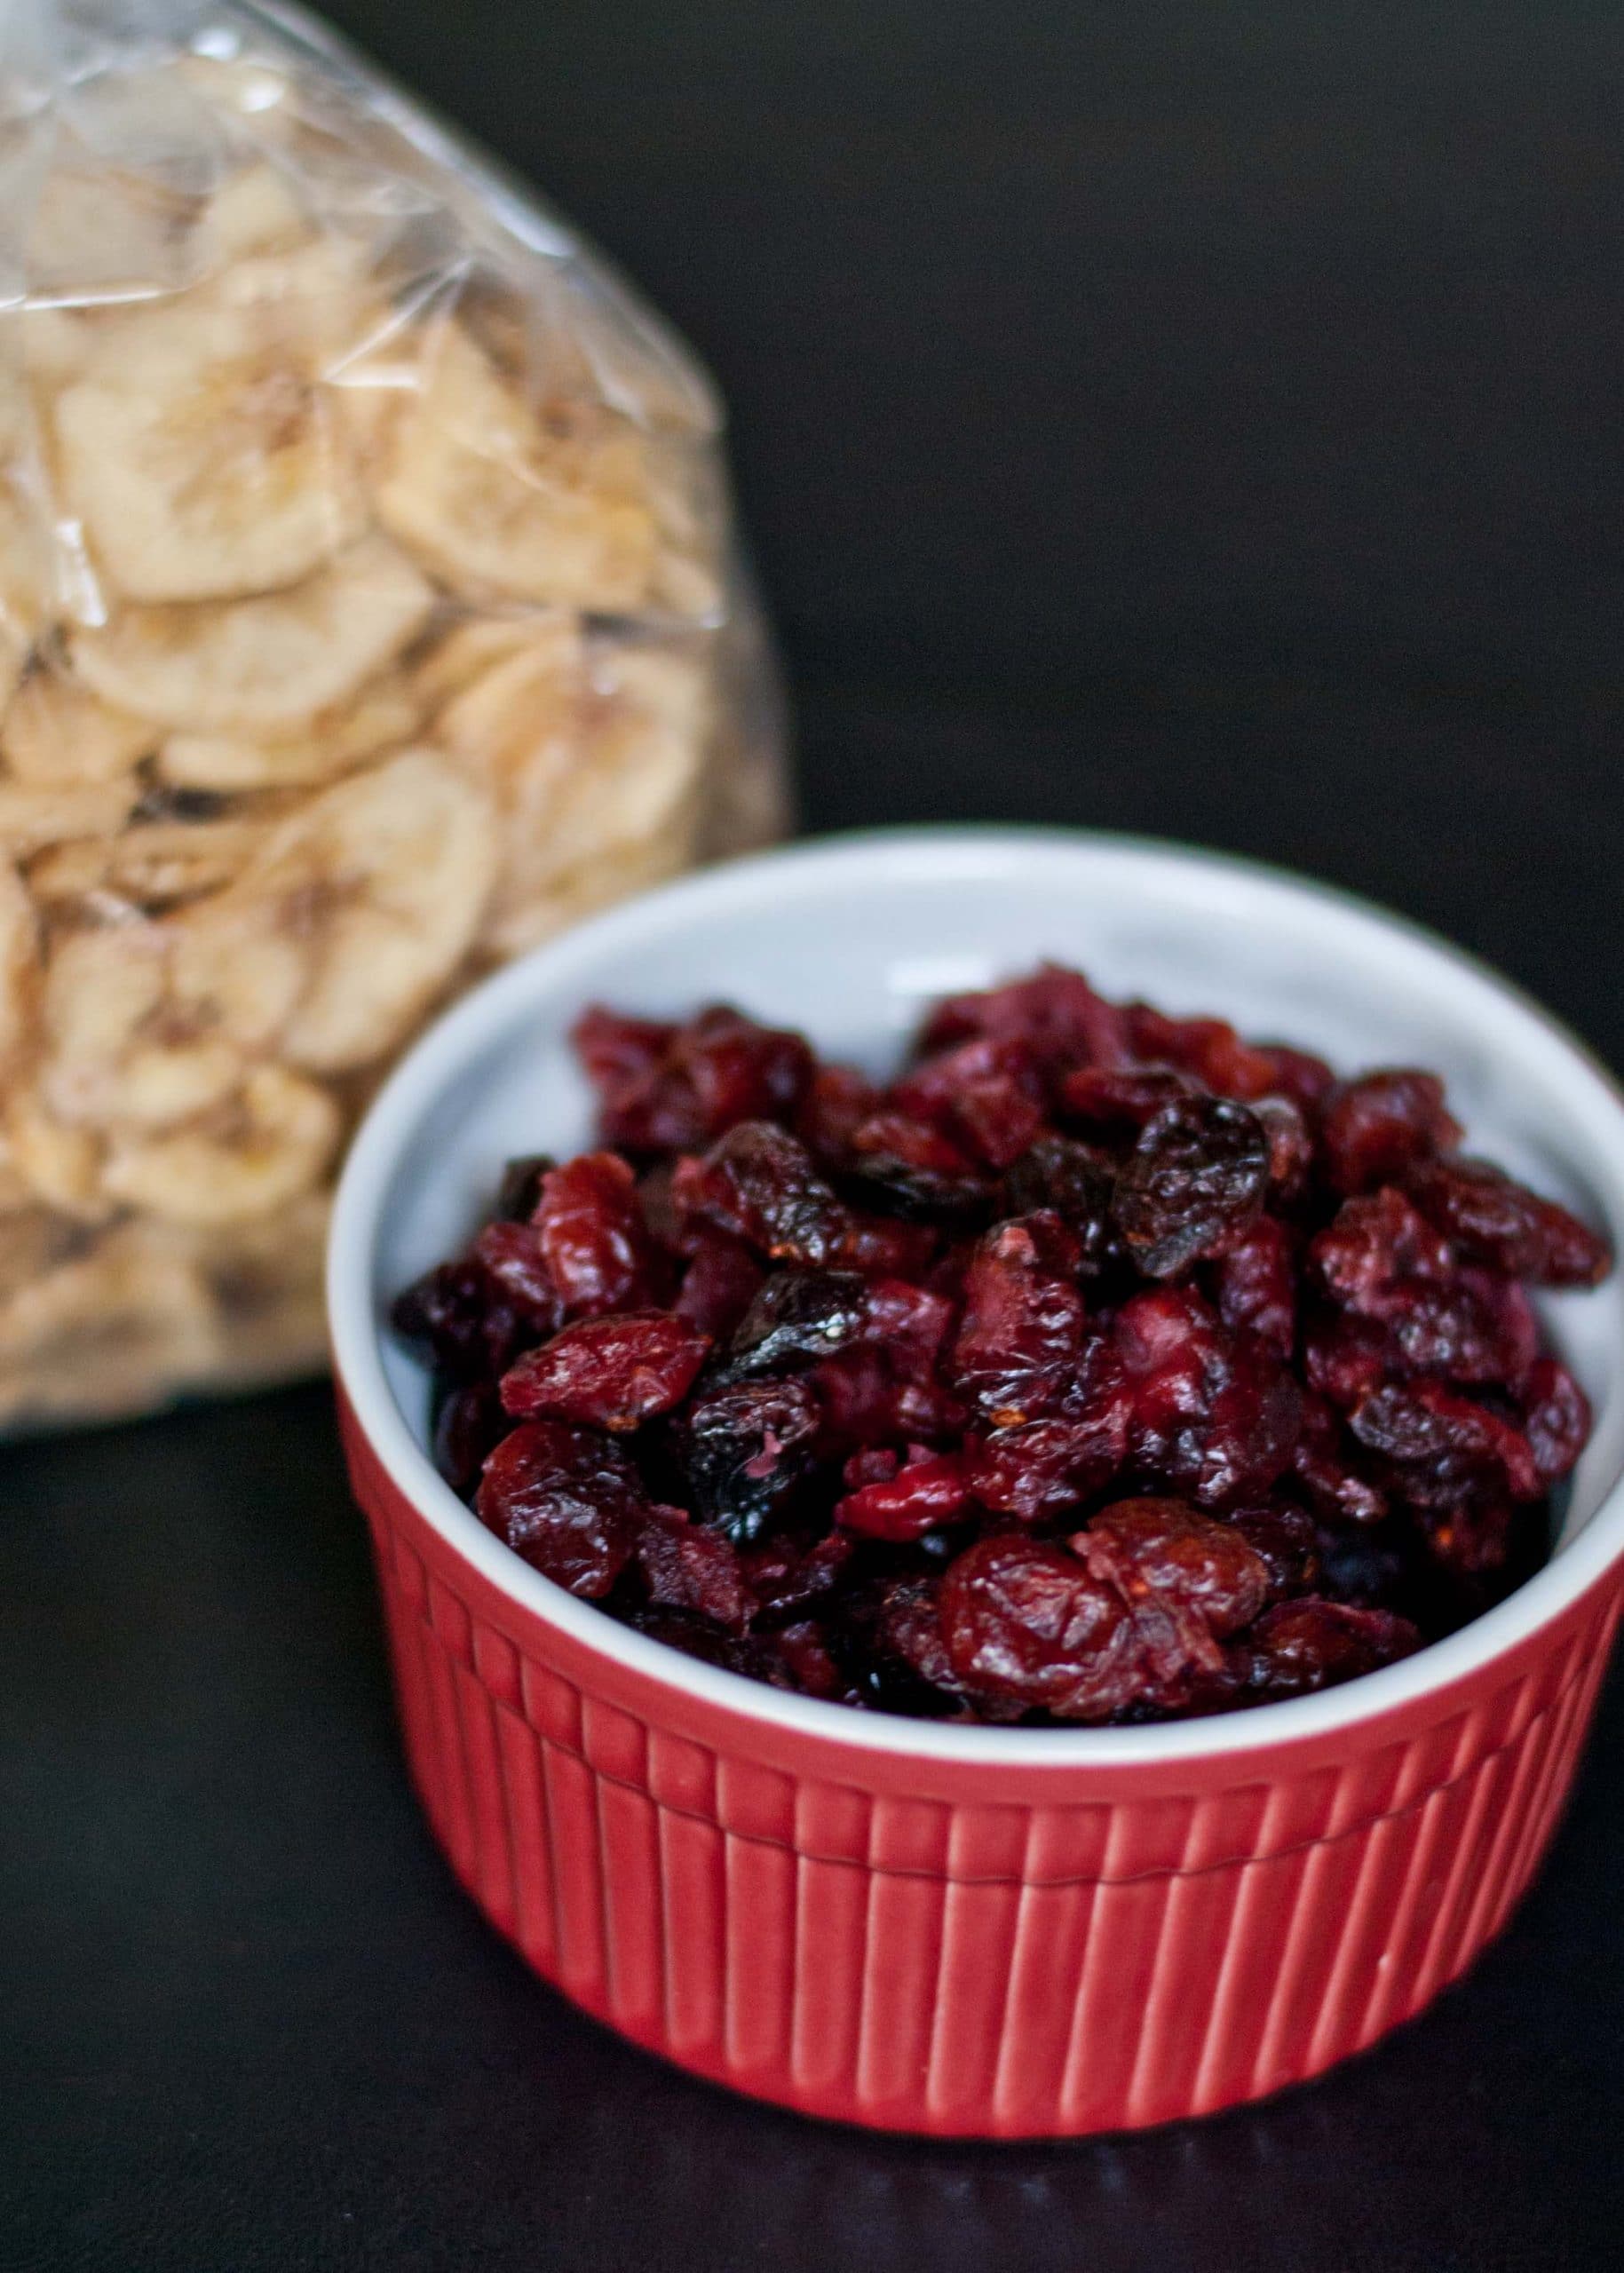 small bowl of dried cherries and a bag of dried banana chips